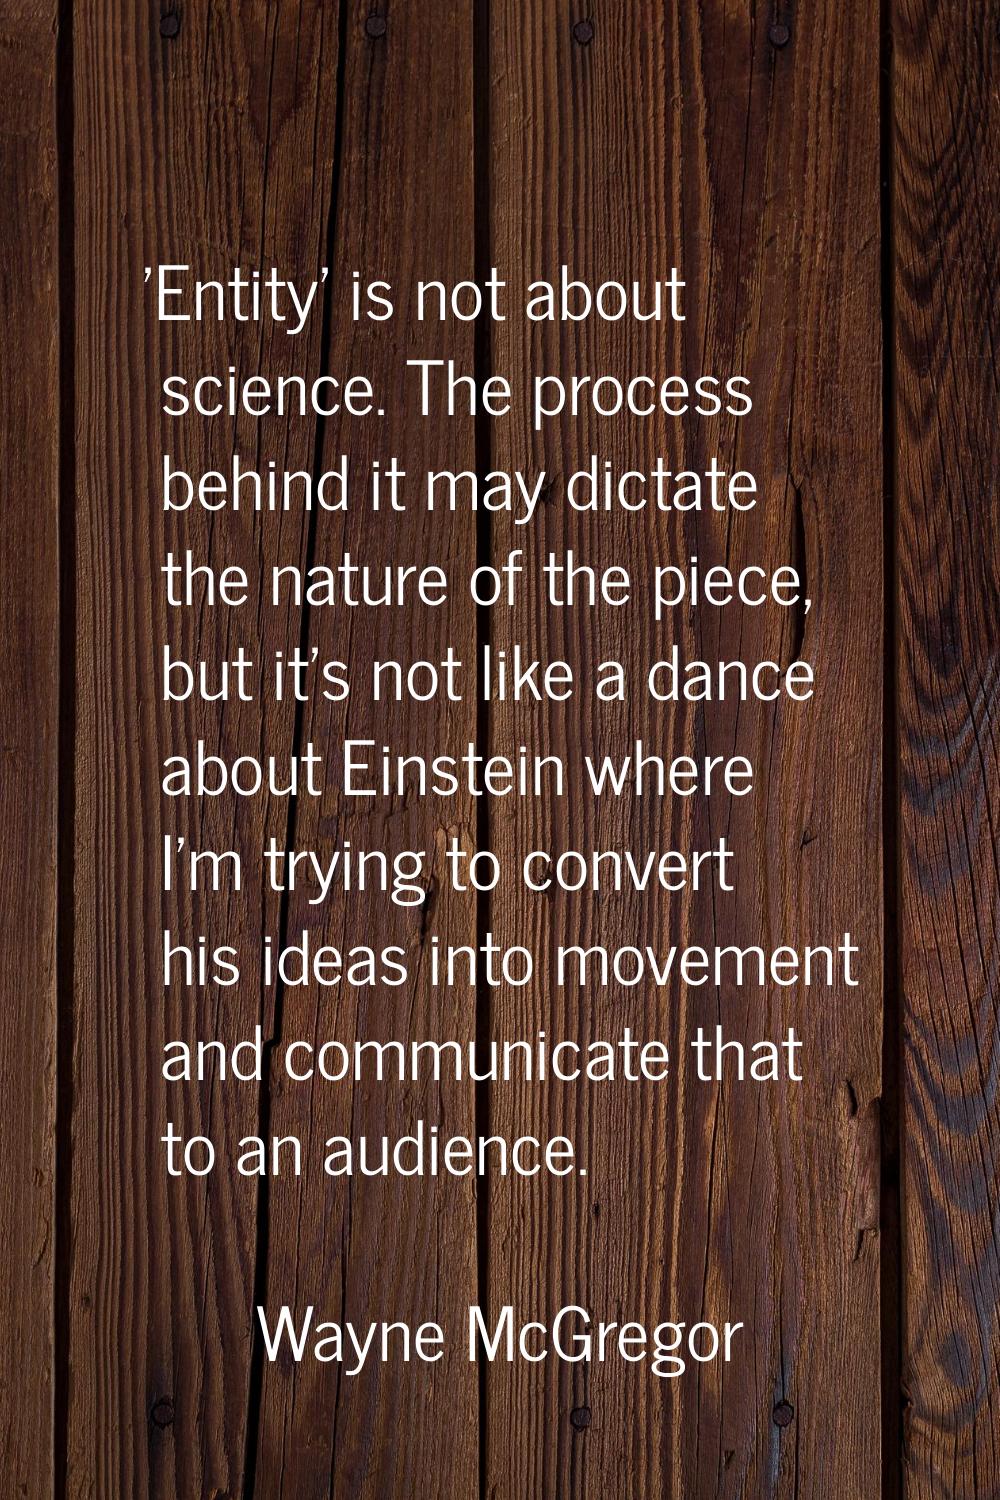 'Entity' is not about science. The process behind it may dictate the nature of the piece, but it's 